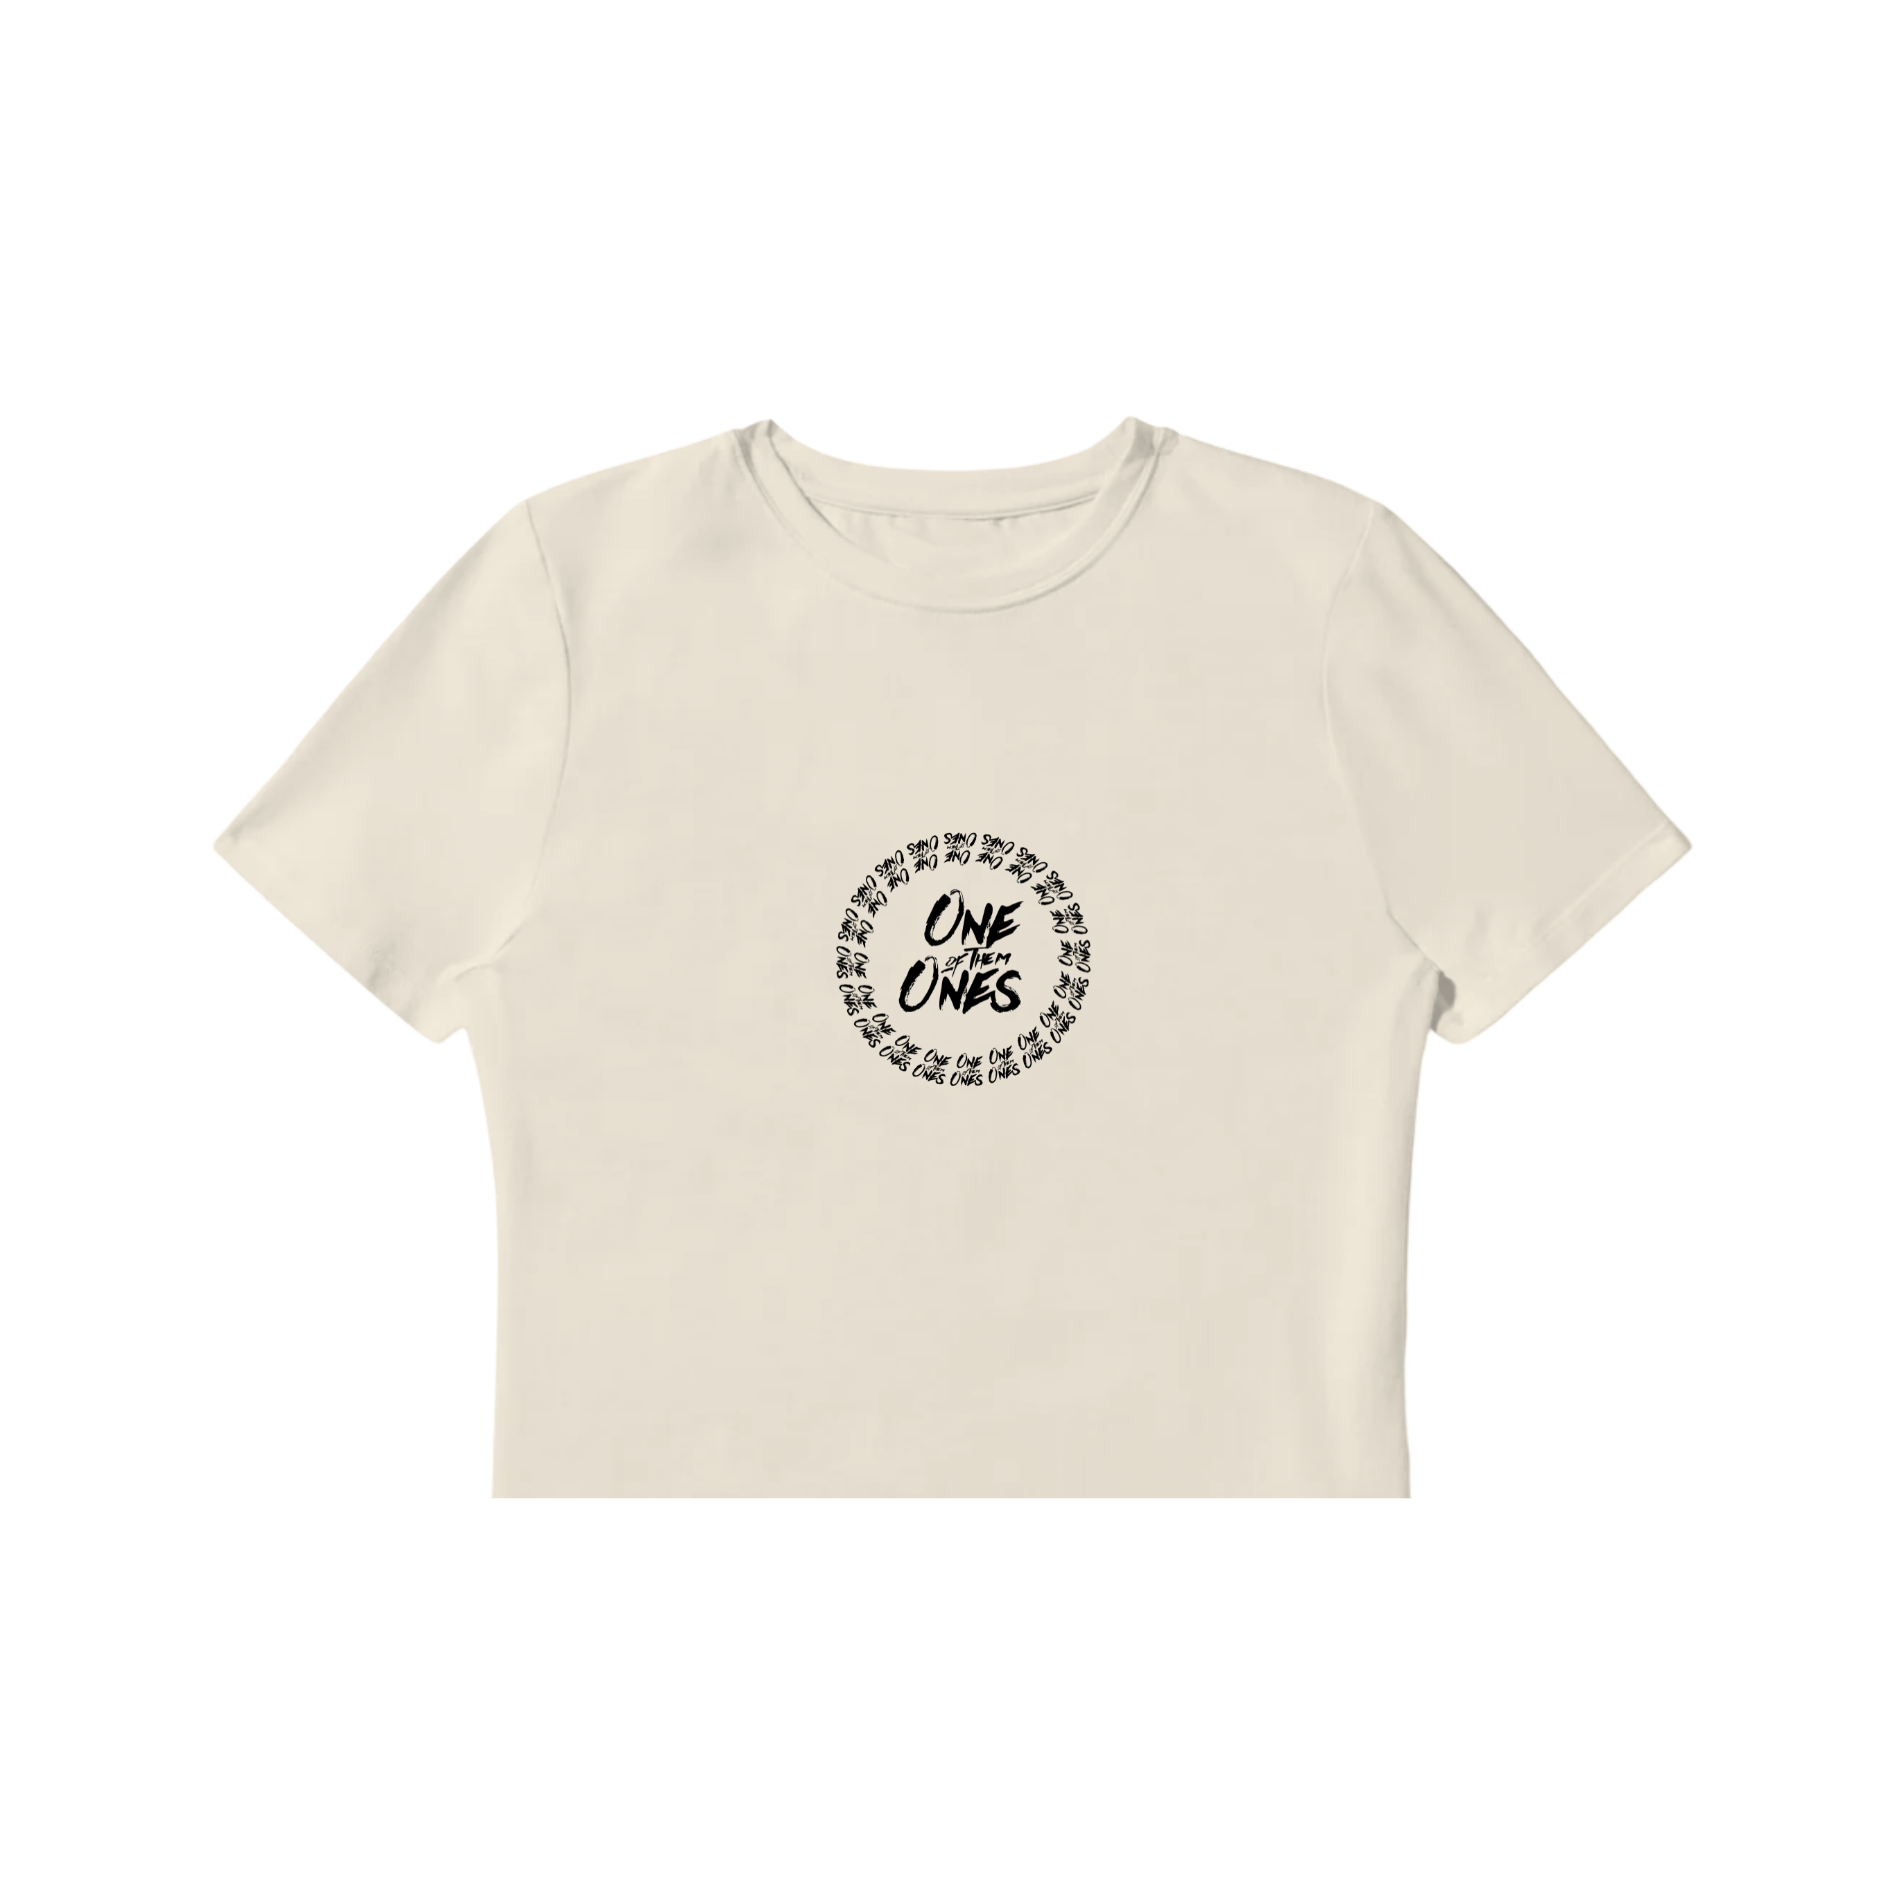 One Of Them Ones - Tan Baby Tee